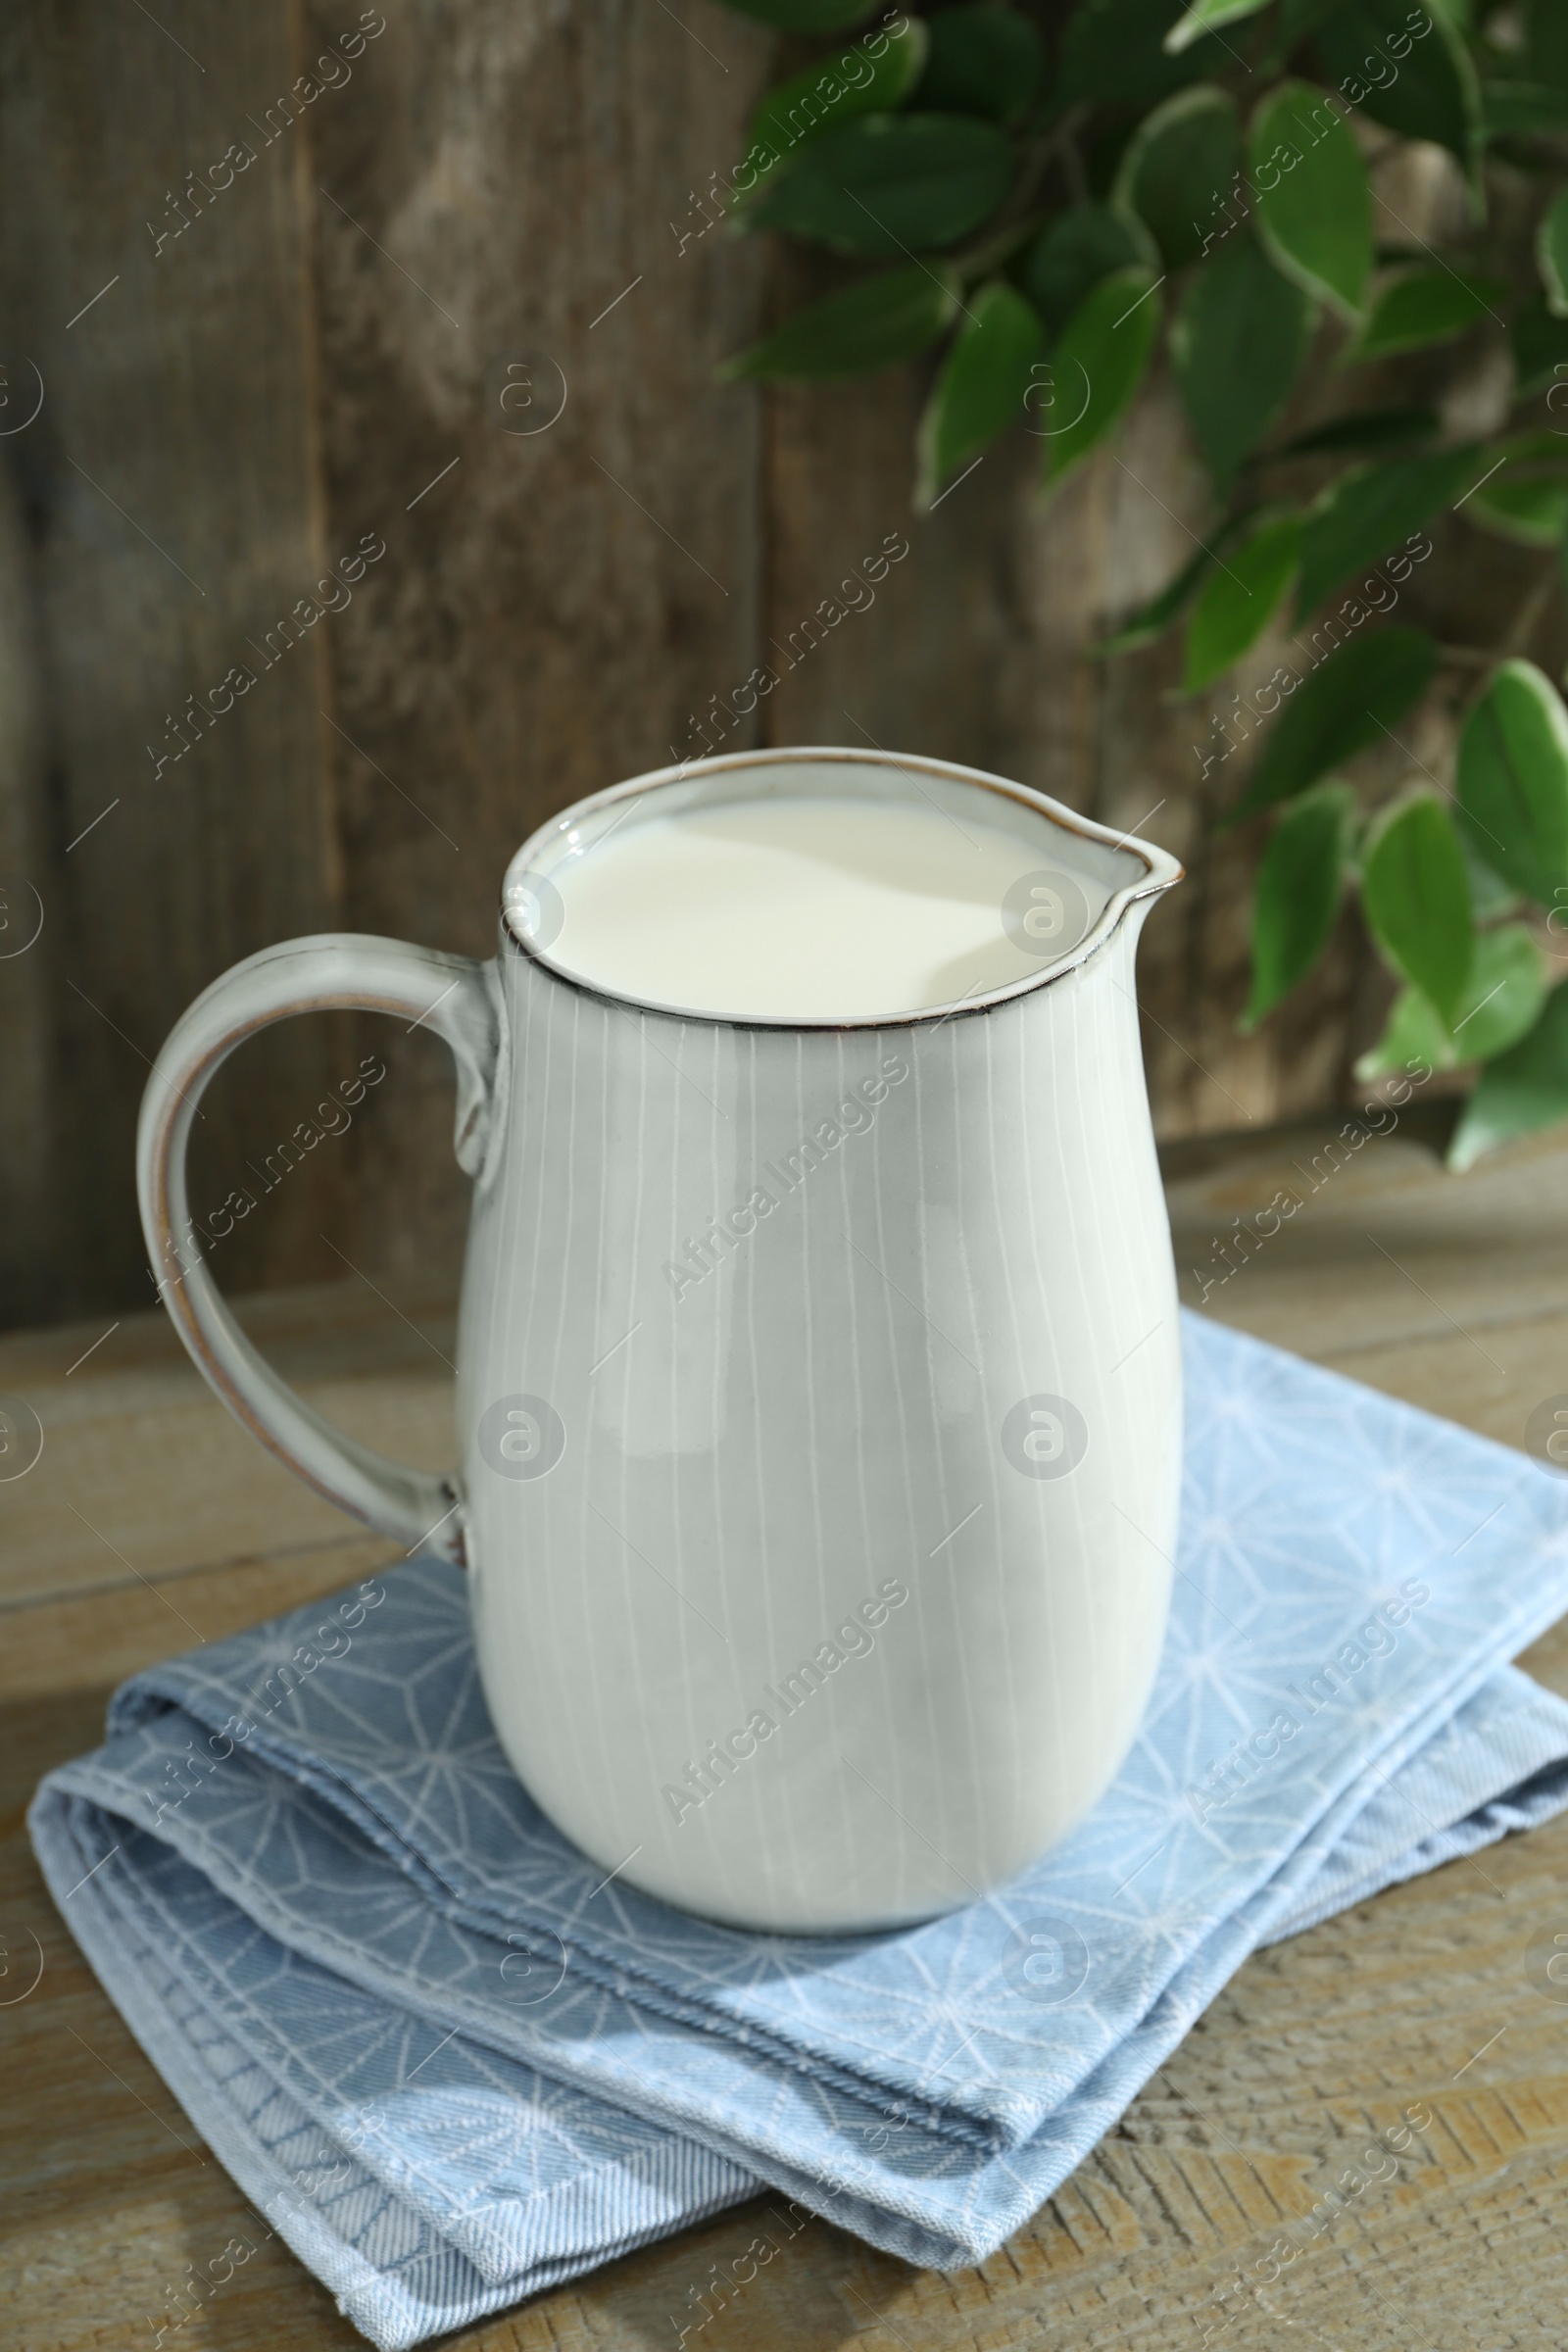 Photo of Jug of fresh milk on wooden table